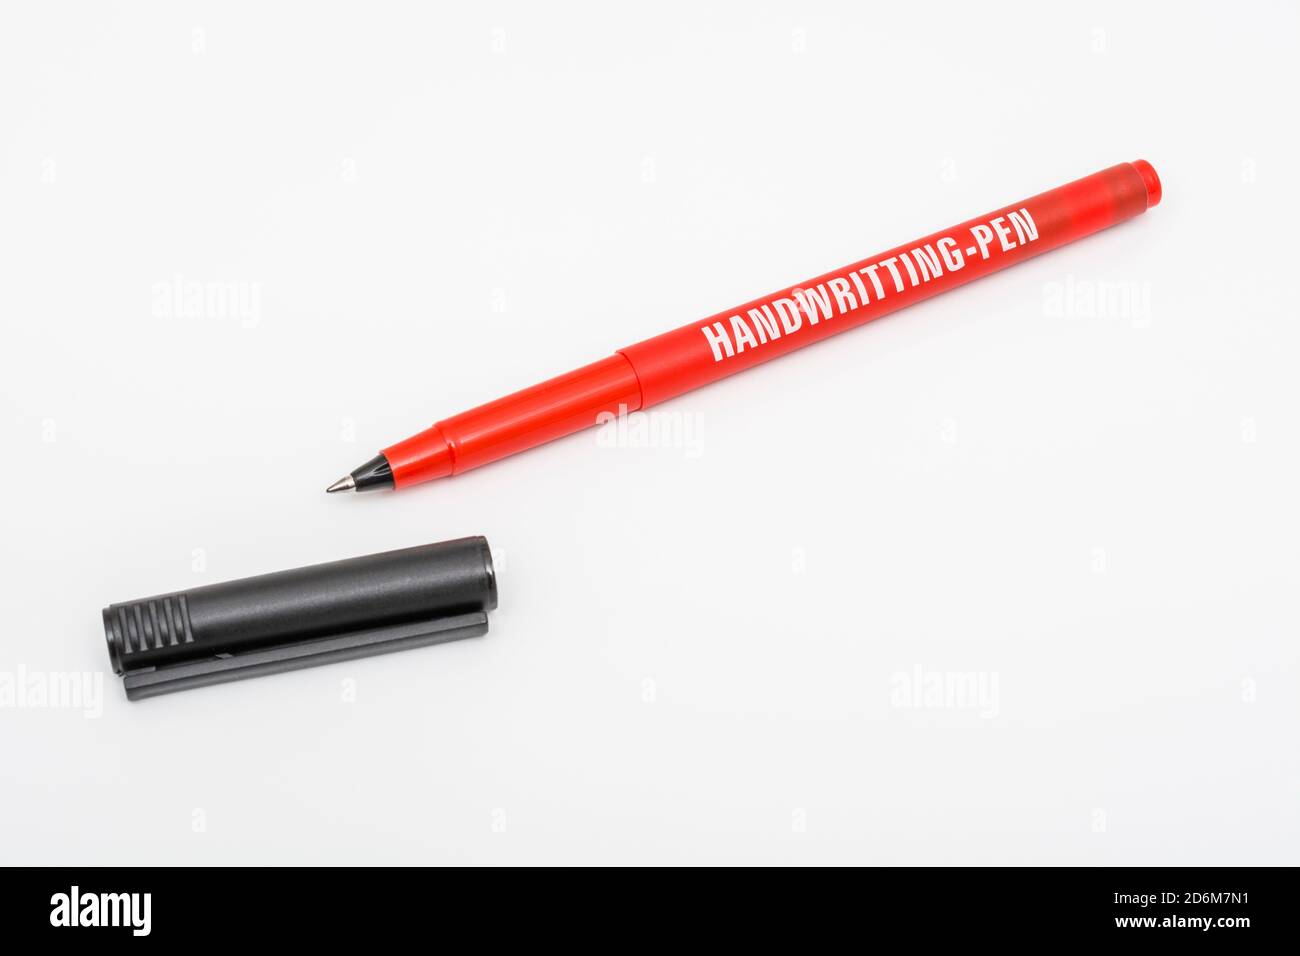 https://c8.alamy.com/comp/2D6M7N1/own-brand-poundland-roller-pens-with-word-handwriting-misspelled-on-an-off-white-bg-for-typo-misprint-poor-spelling-bad-english-writing-error-2D6M7N1.jpg